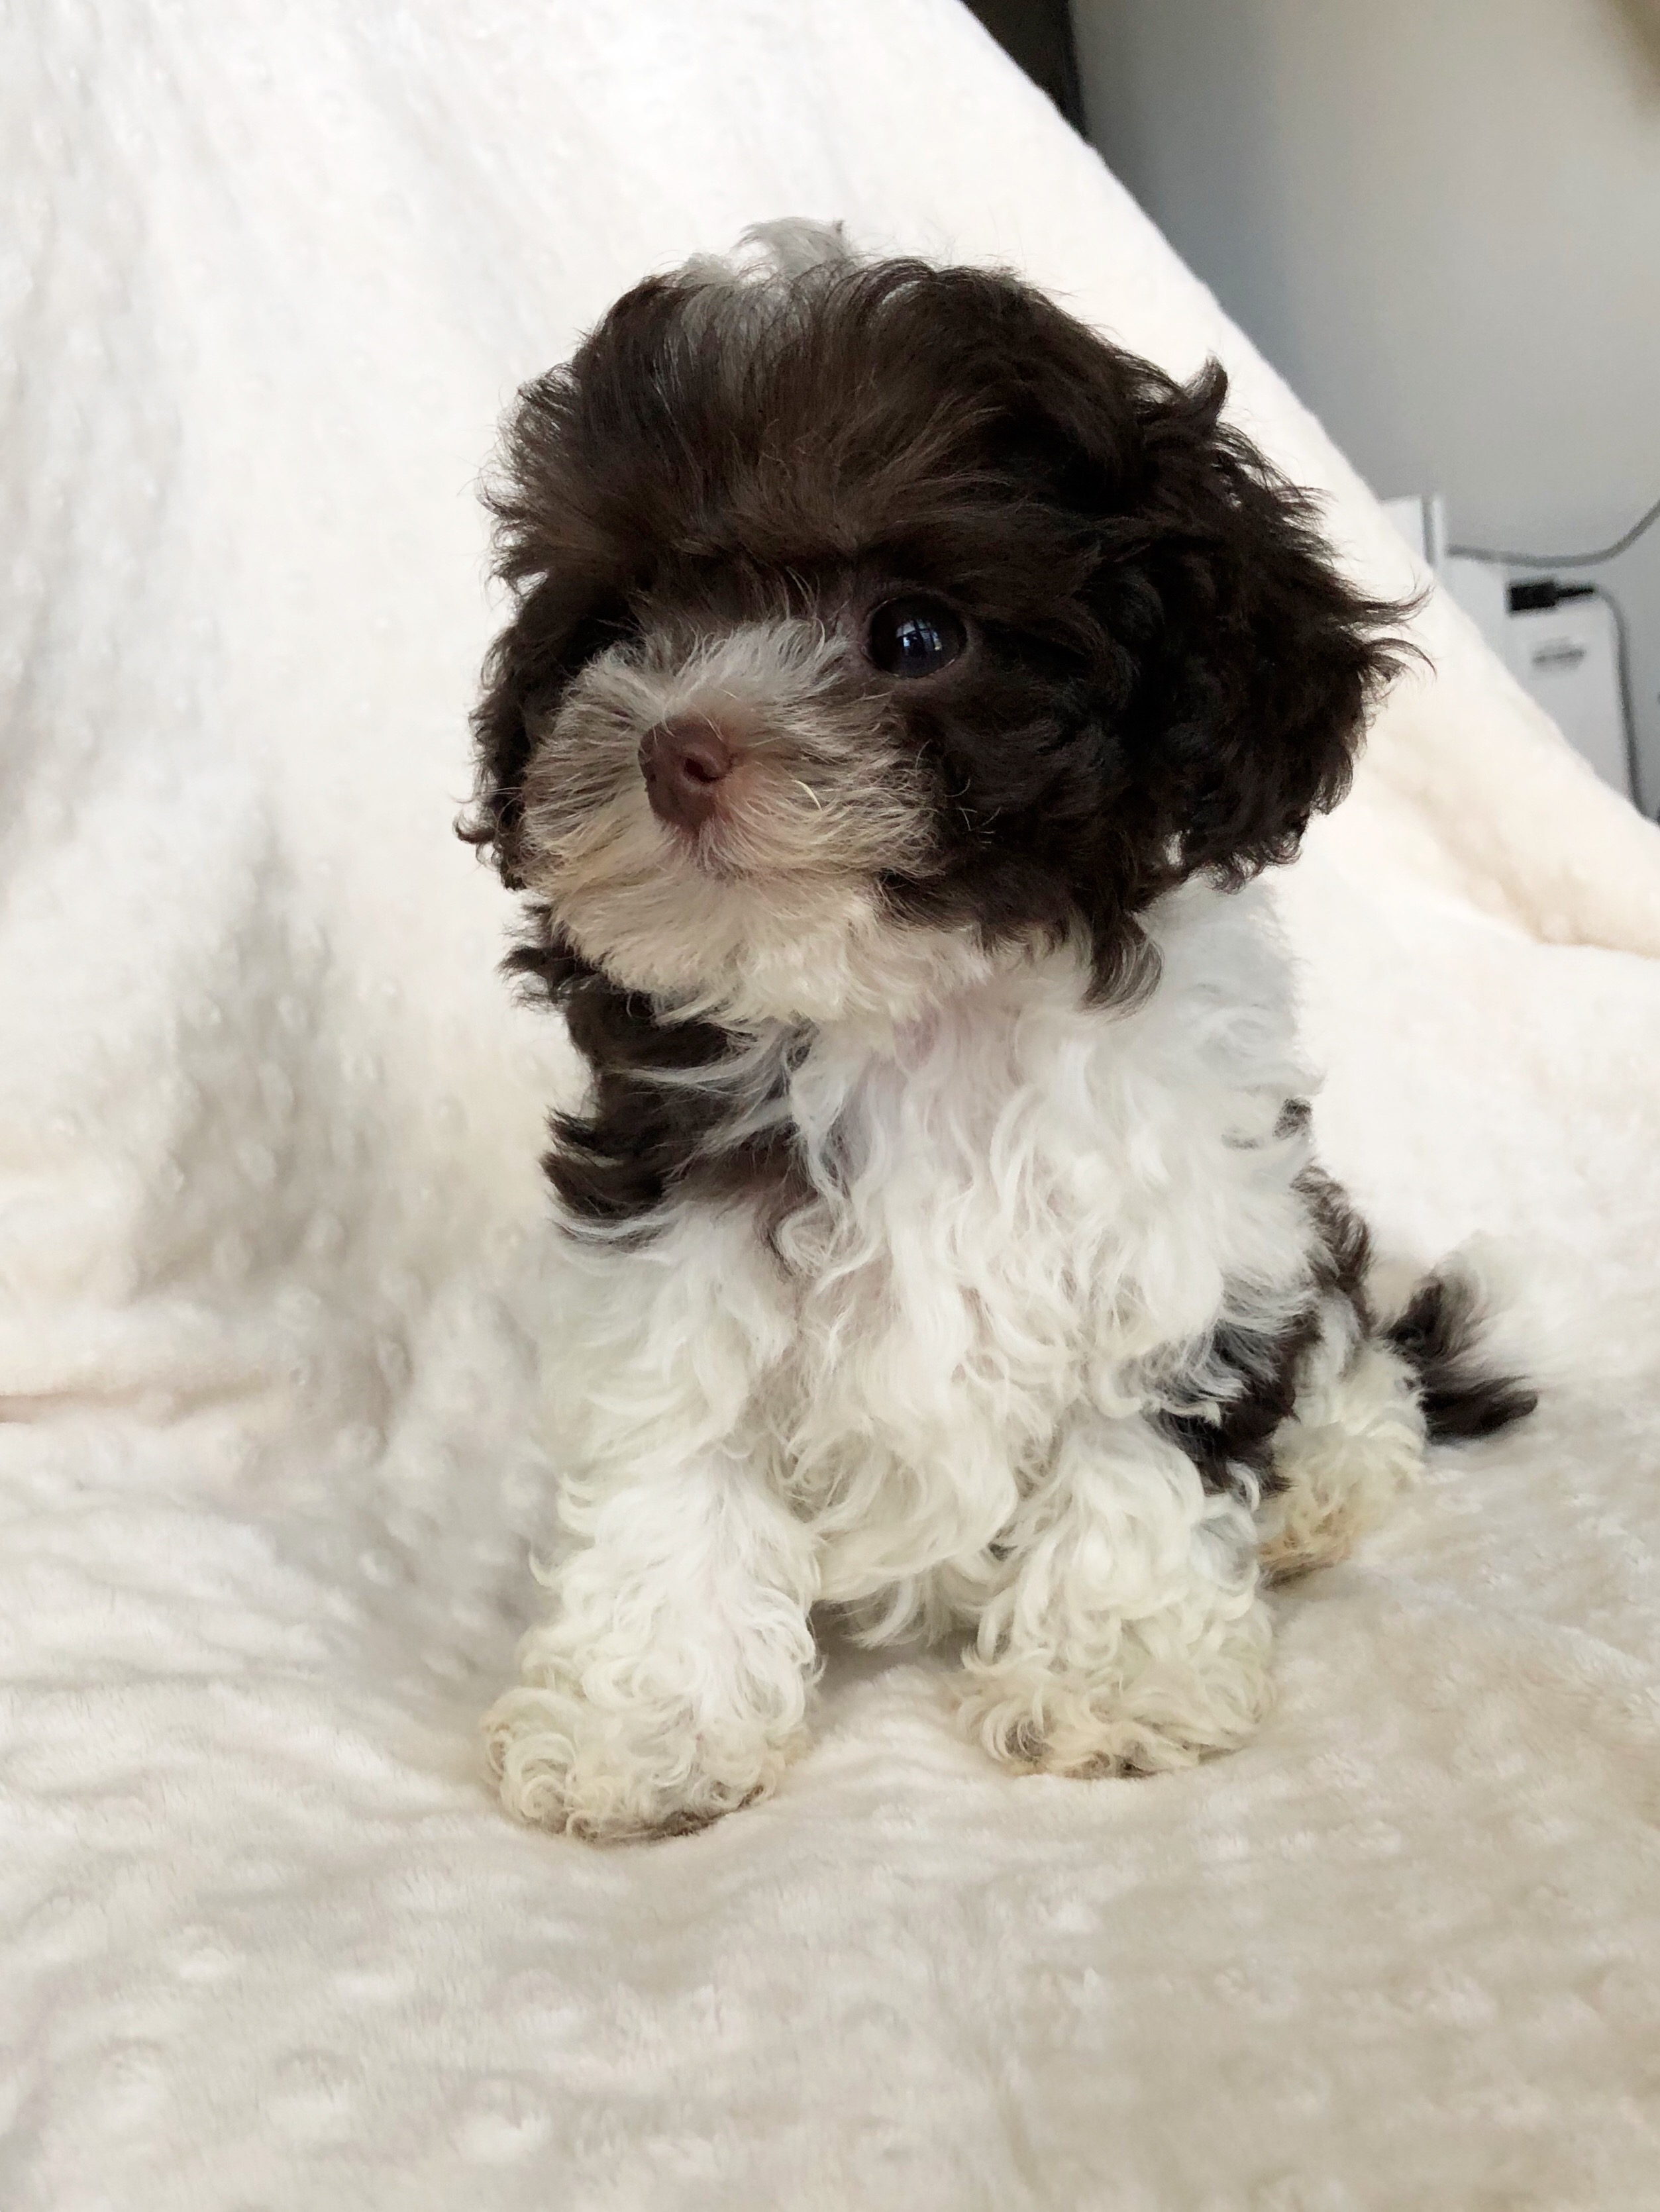 Chocolate and White Teacup Maltipoo puppy for sale | iHeartTeacups